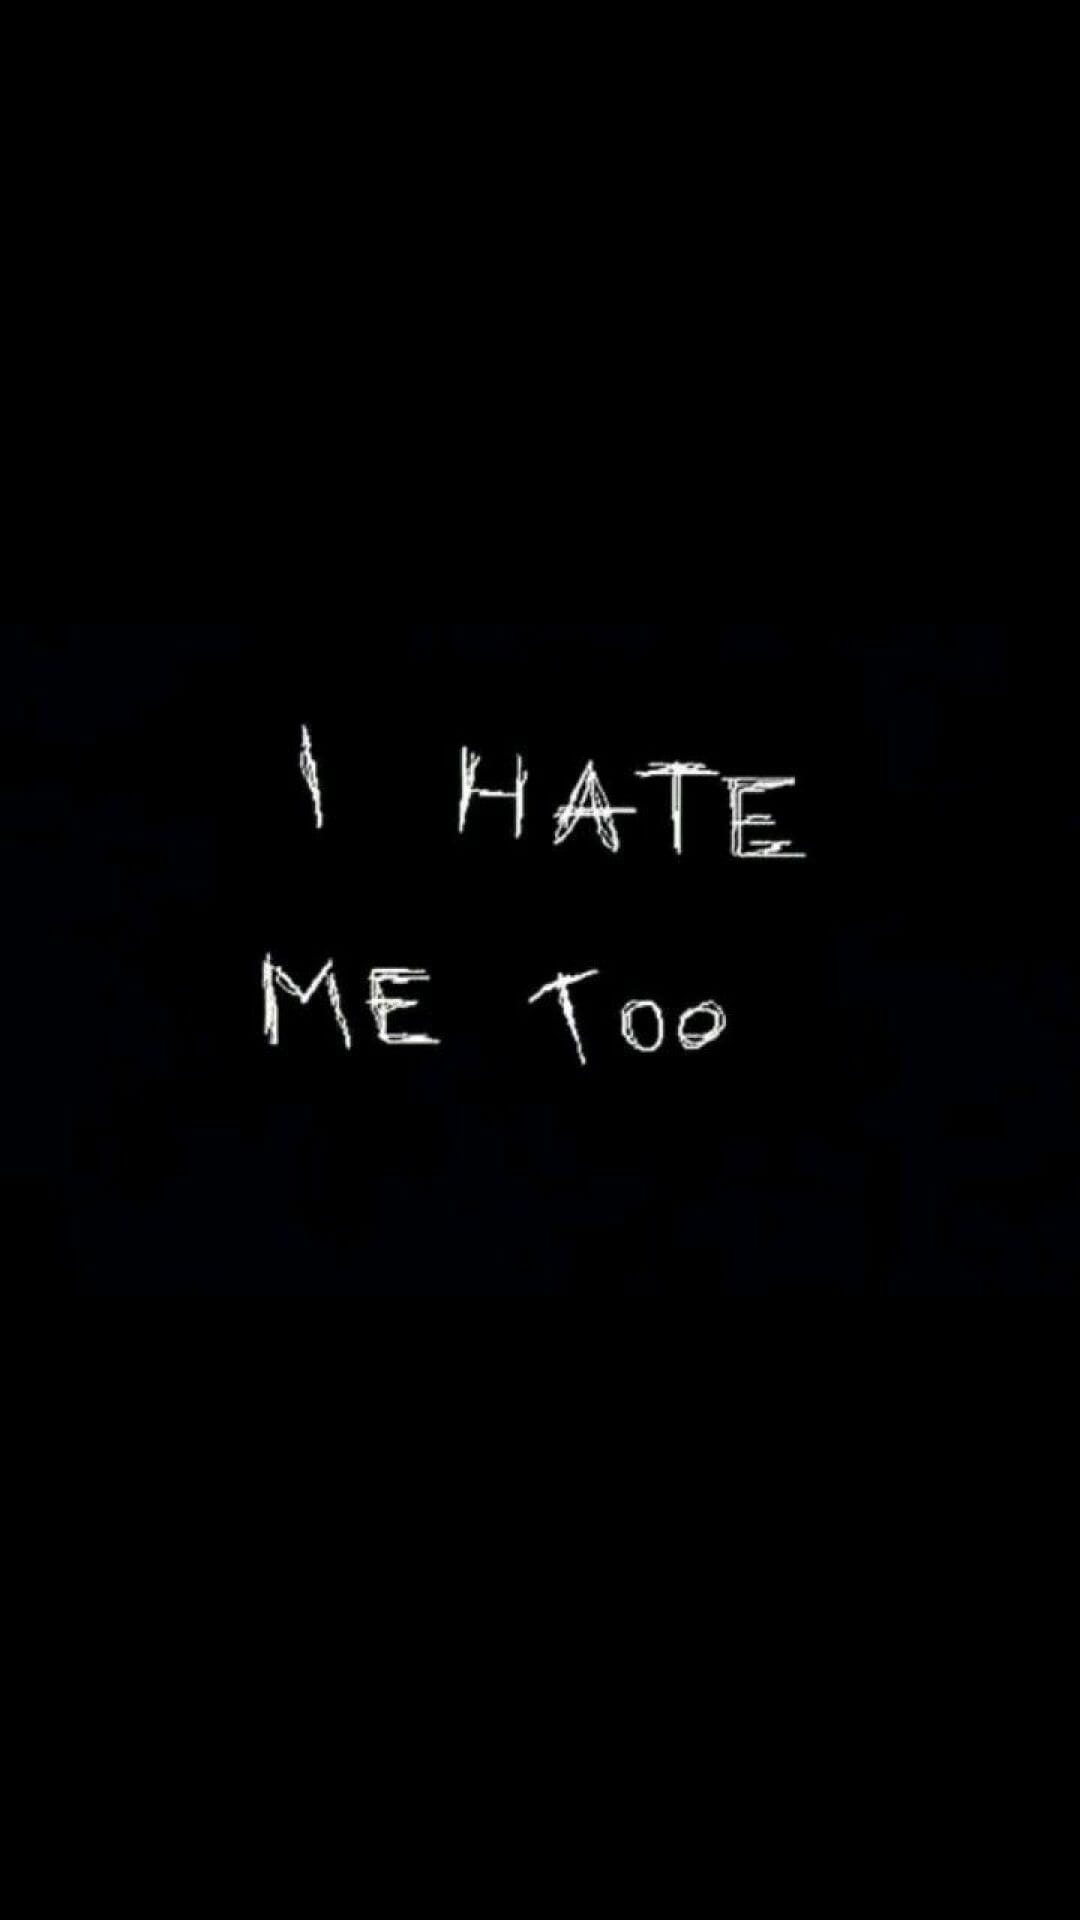 A black background with the words i hate me too written on it - Sad, depressing, sad quotes